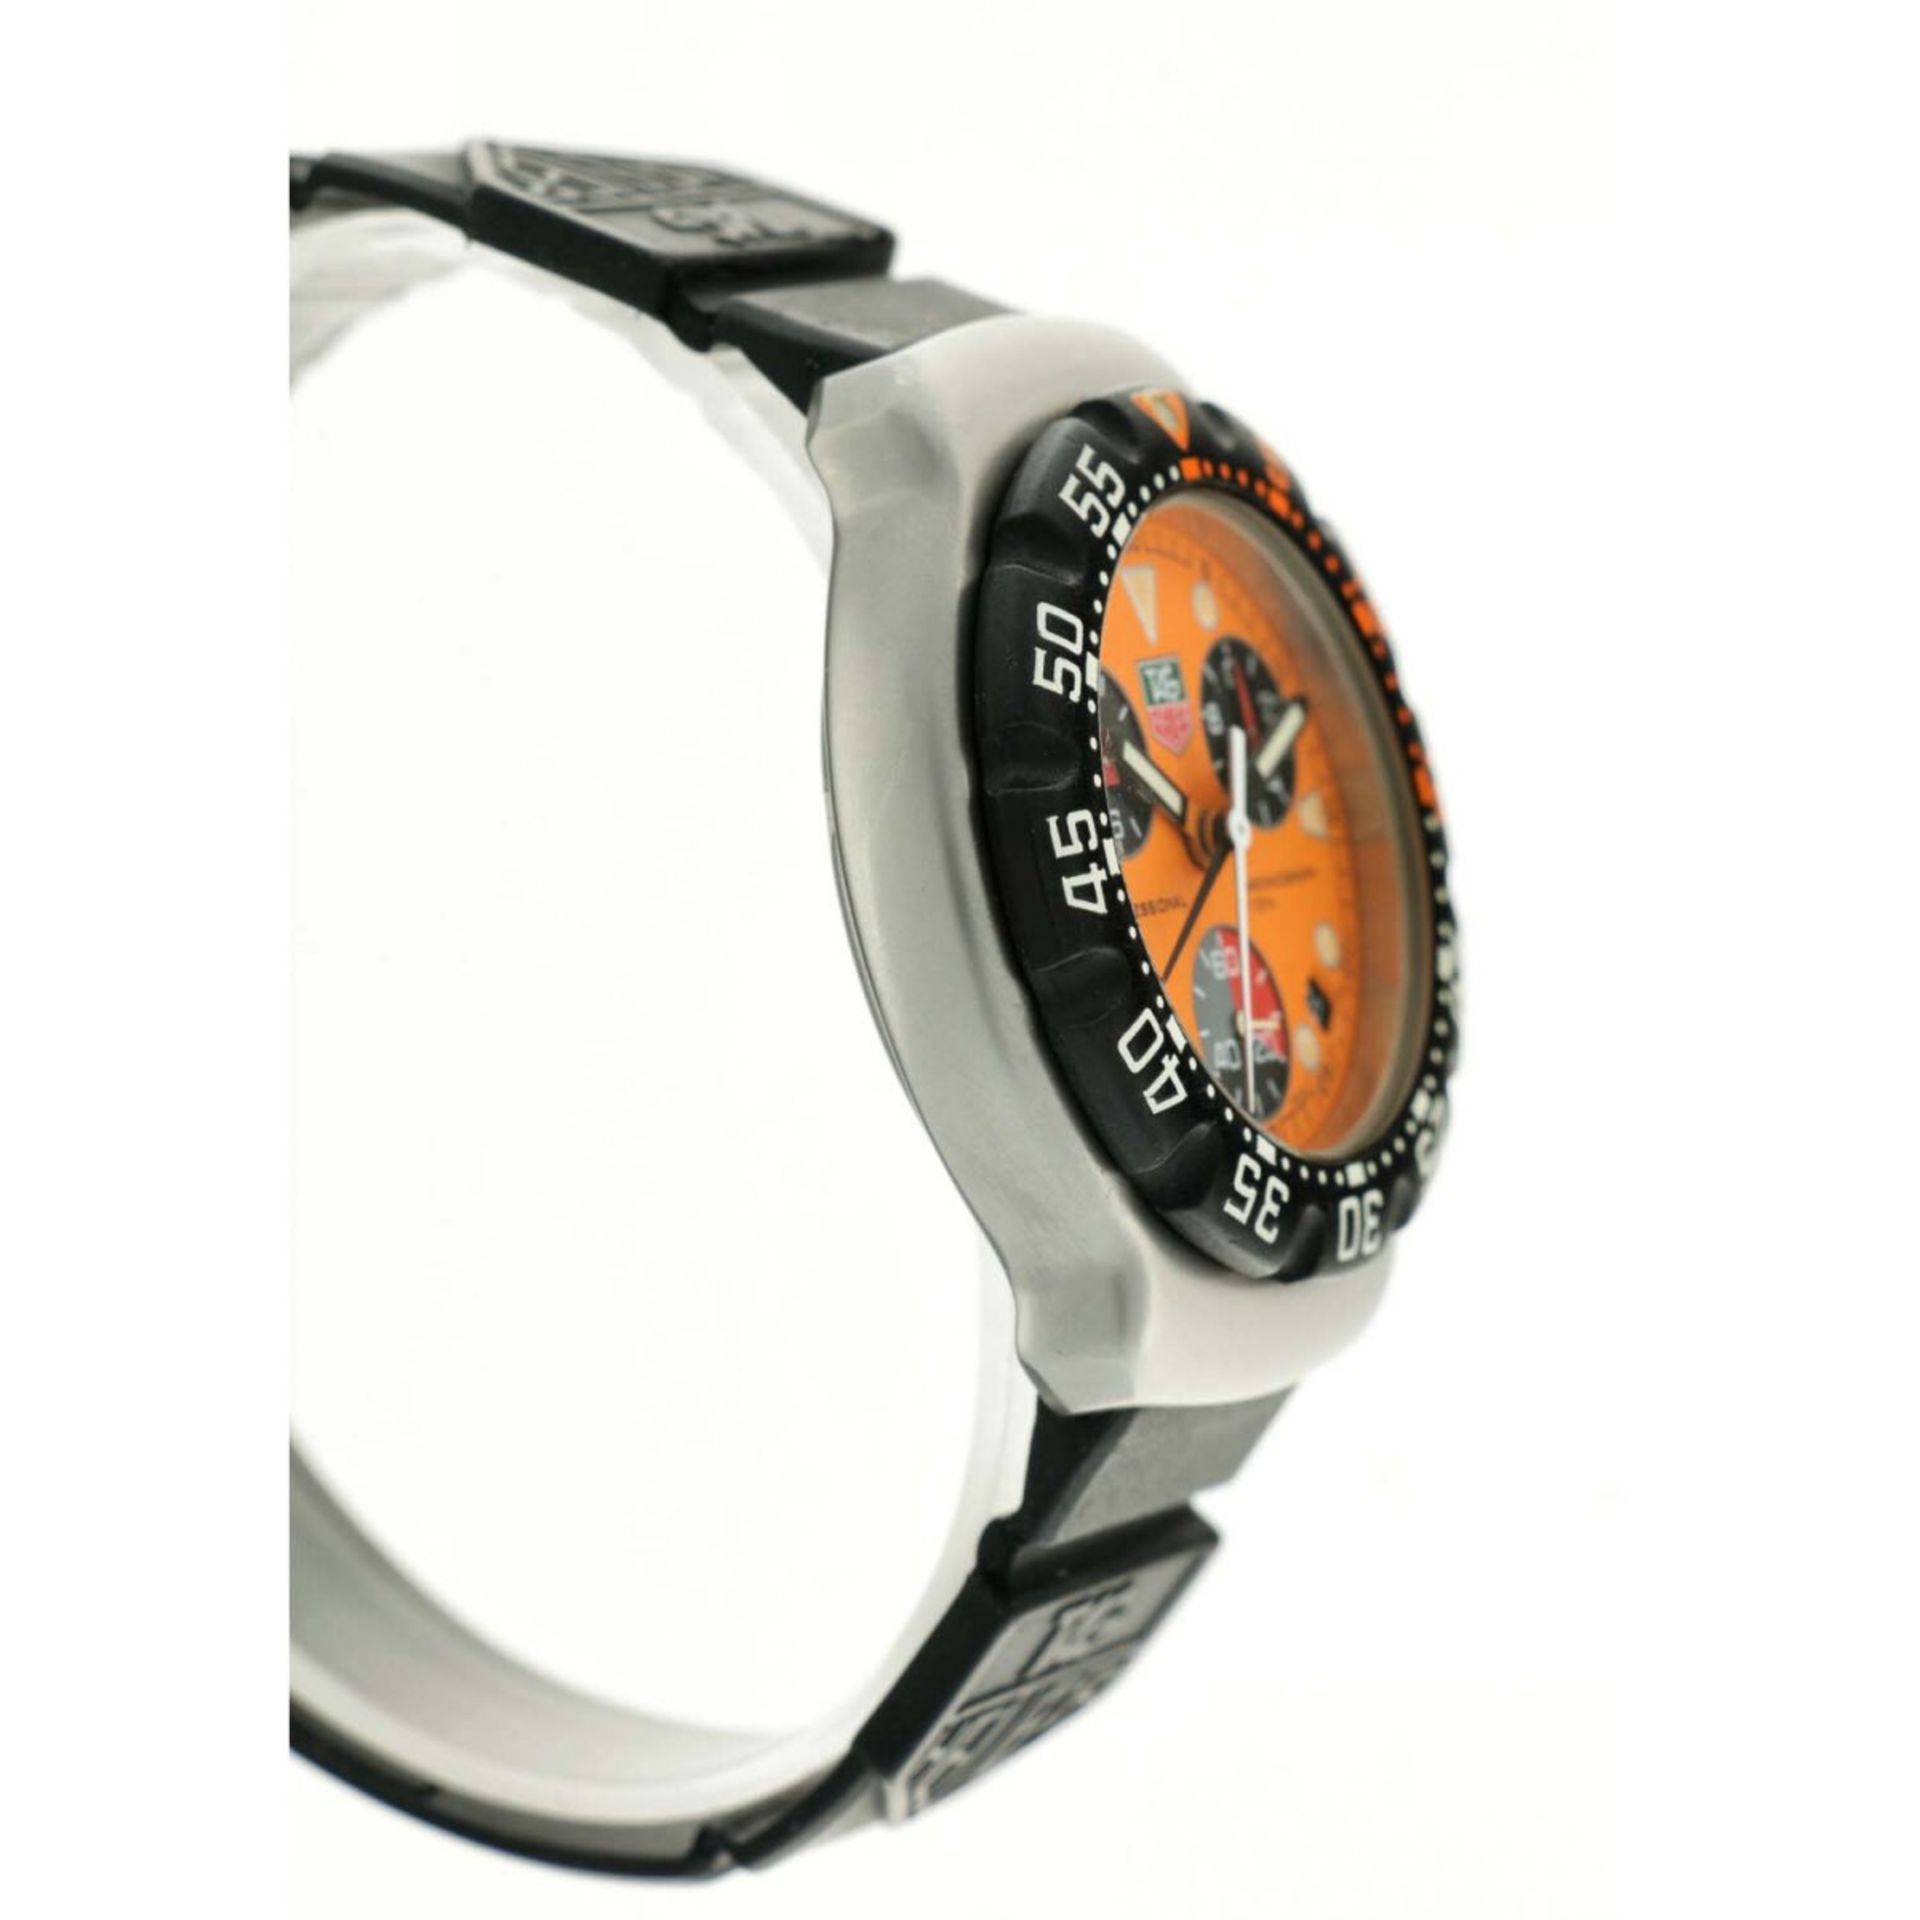 Tag Heuer - Professional 200 - Men's Watch - appr. 2000 - Image 4 of 5